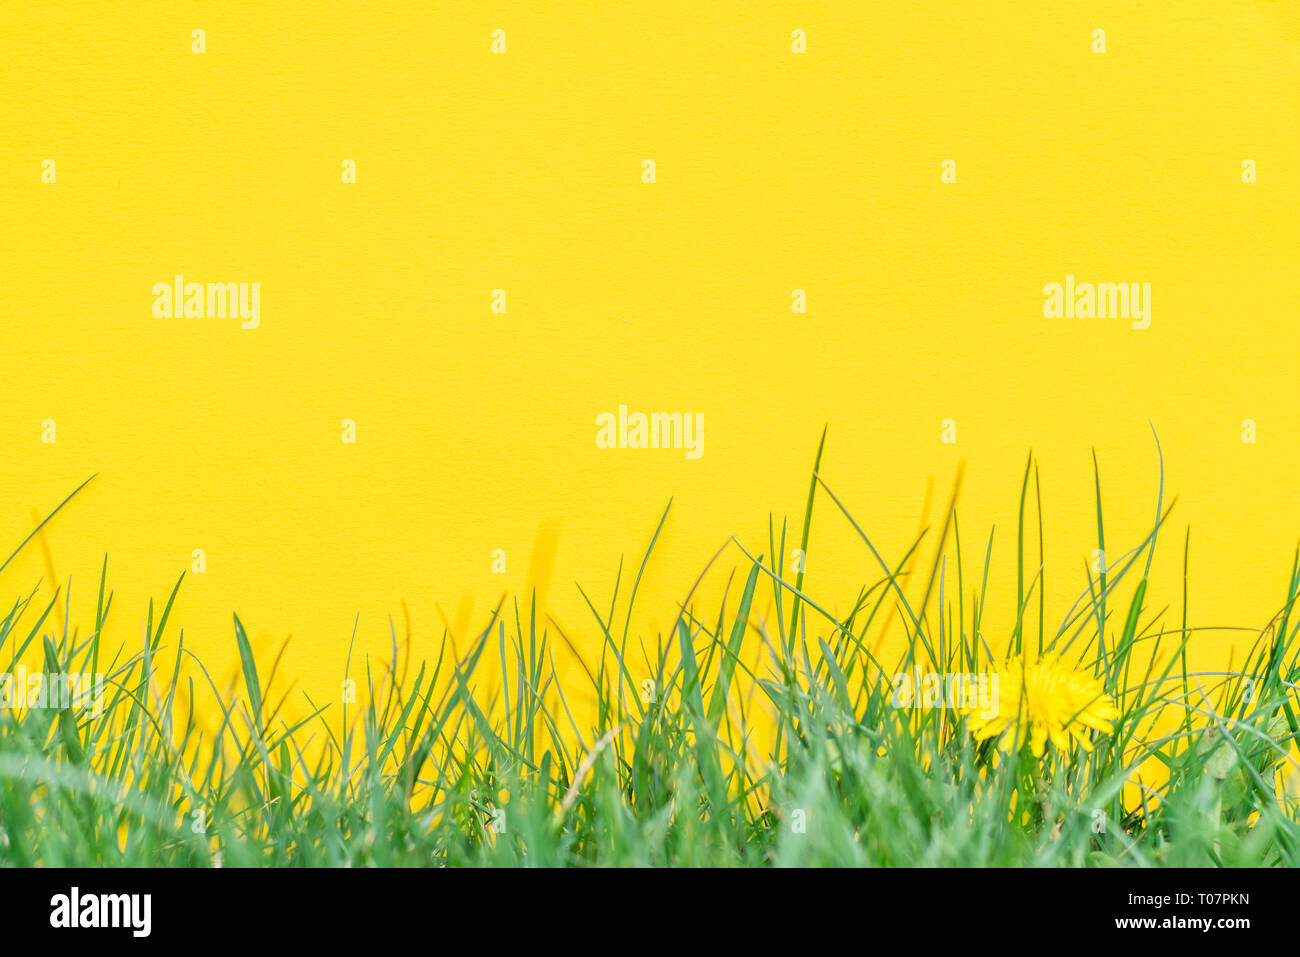 Yellow paper blank on the green grass. Green grass as a frame. Stock Photo